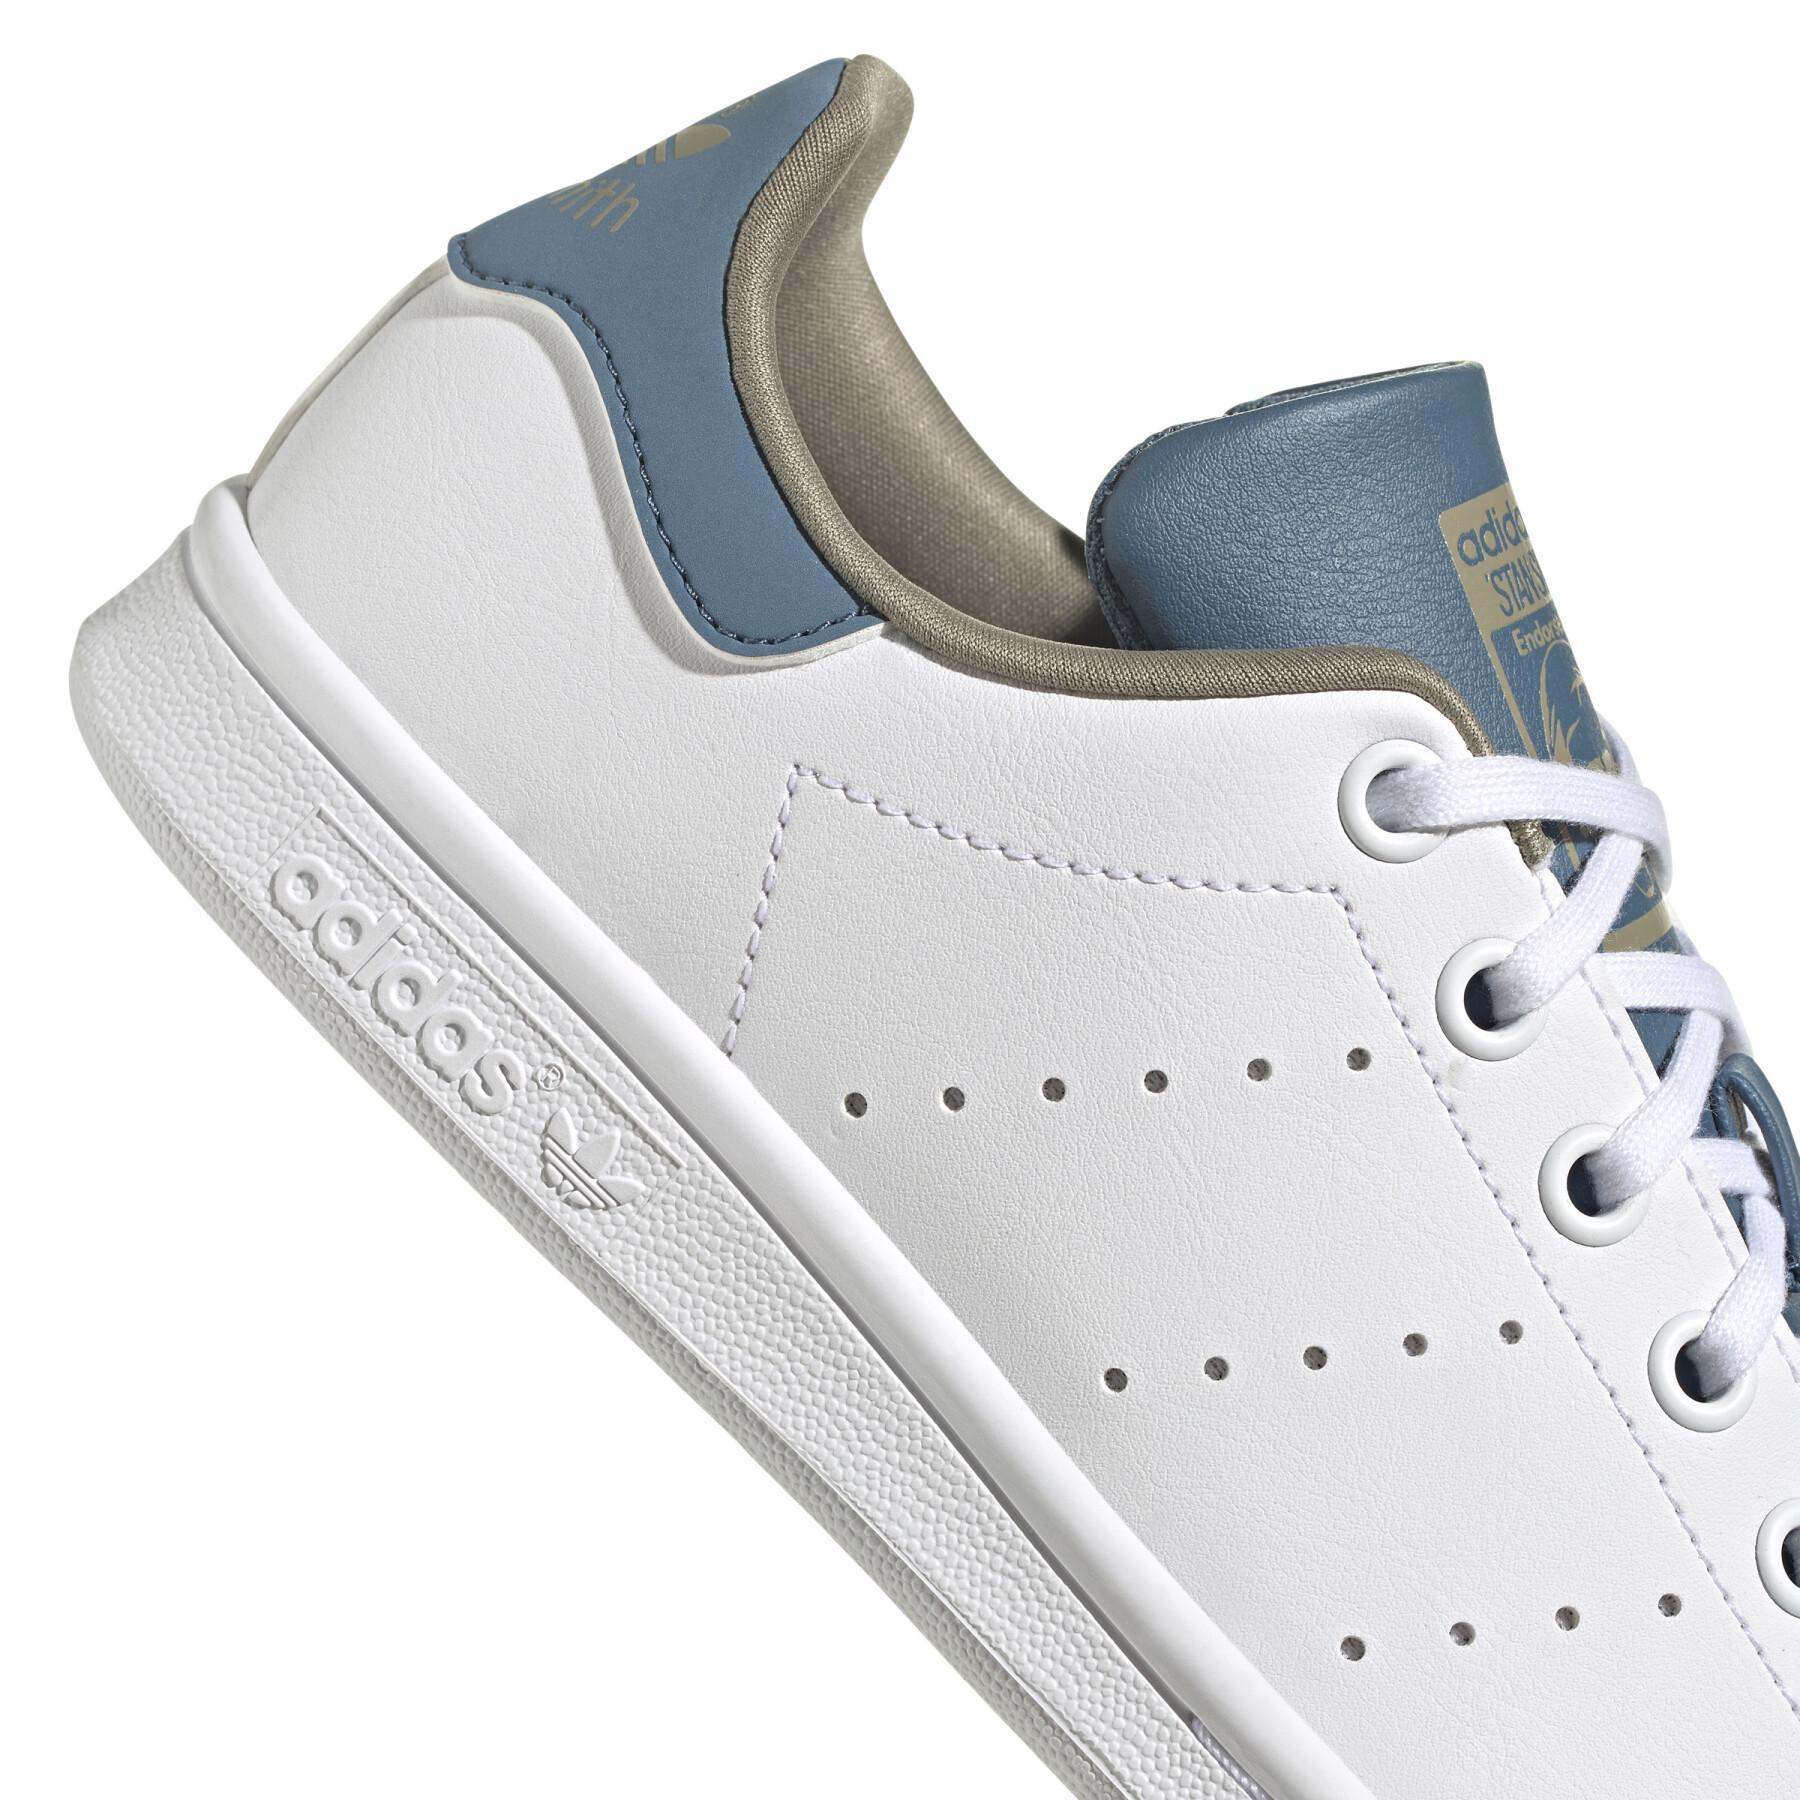 Children's shoes Adidas Stan Smith